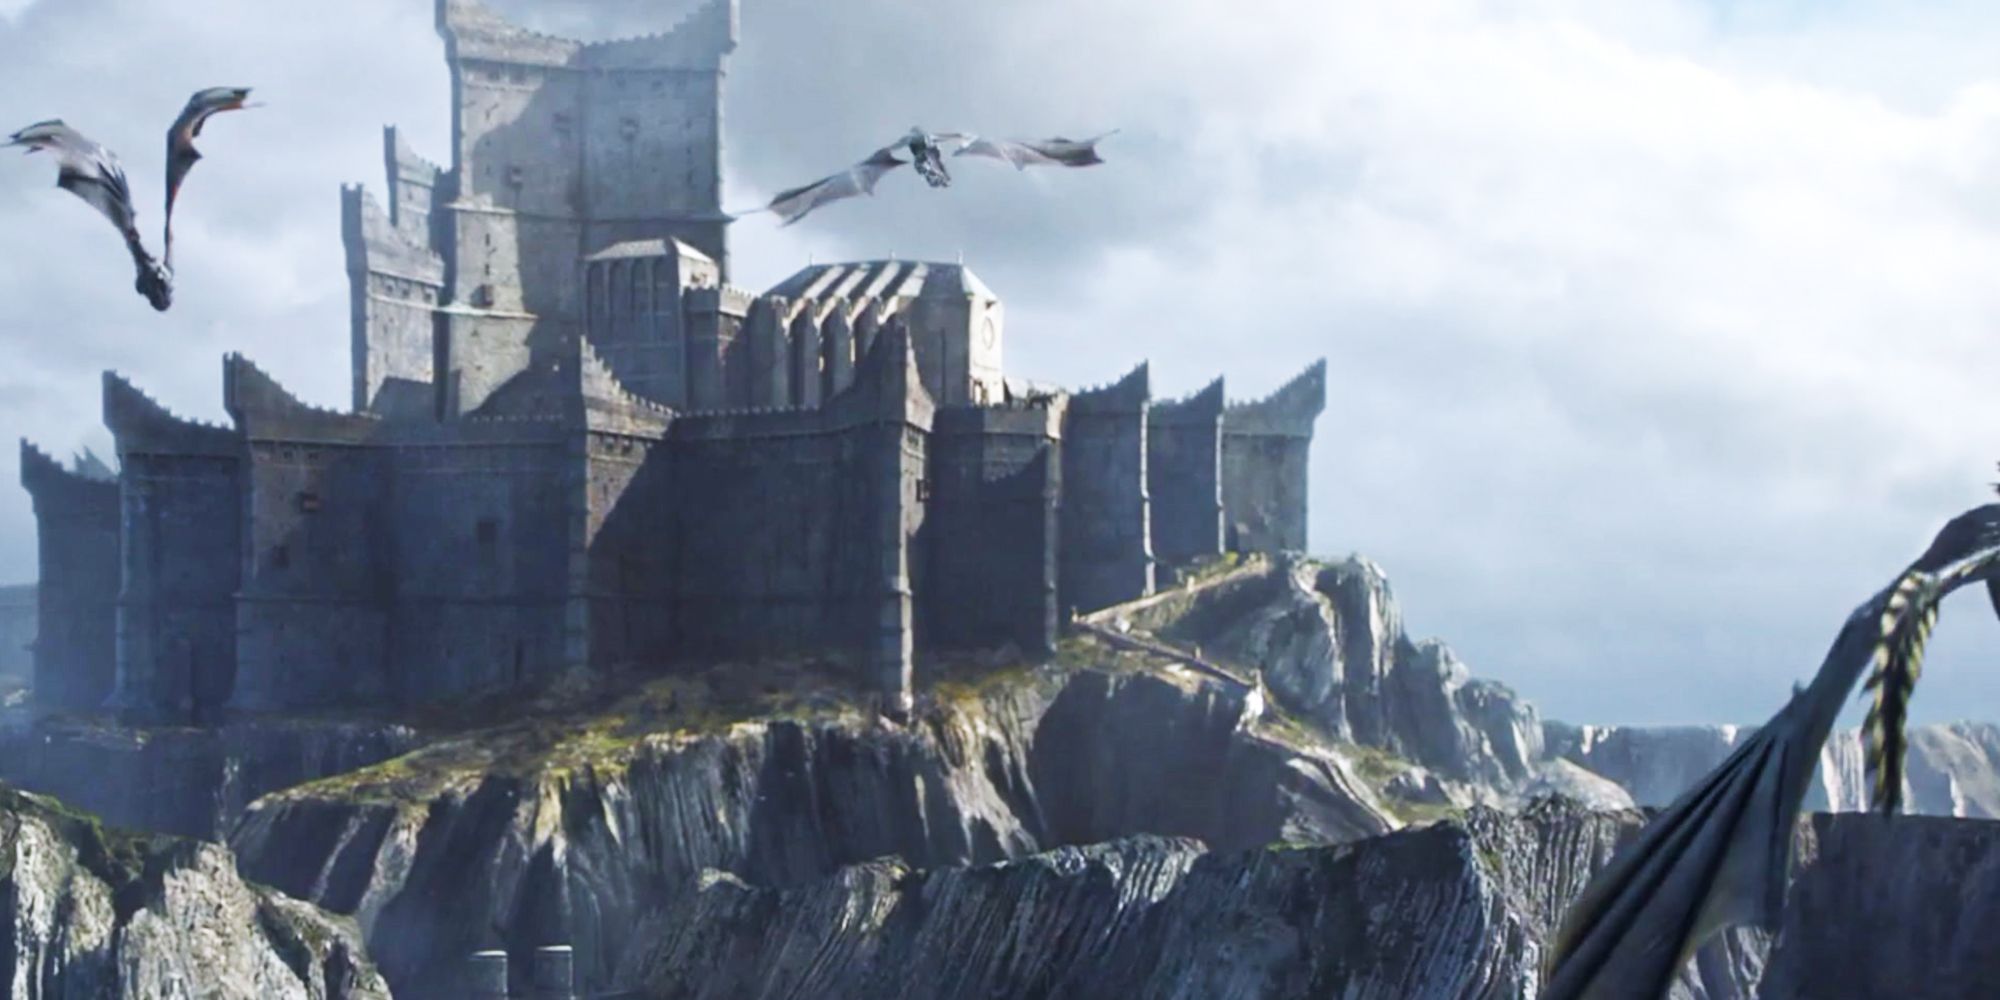 Dragons flying over Dragonstone in House of the Dragon.